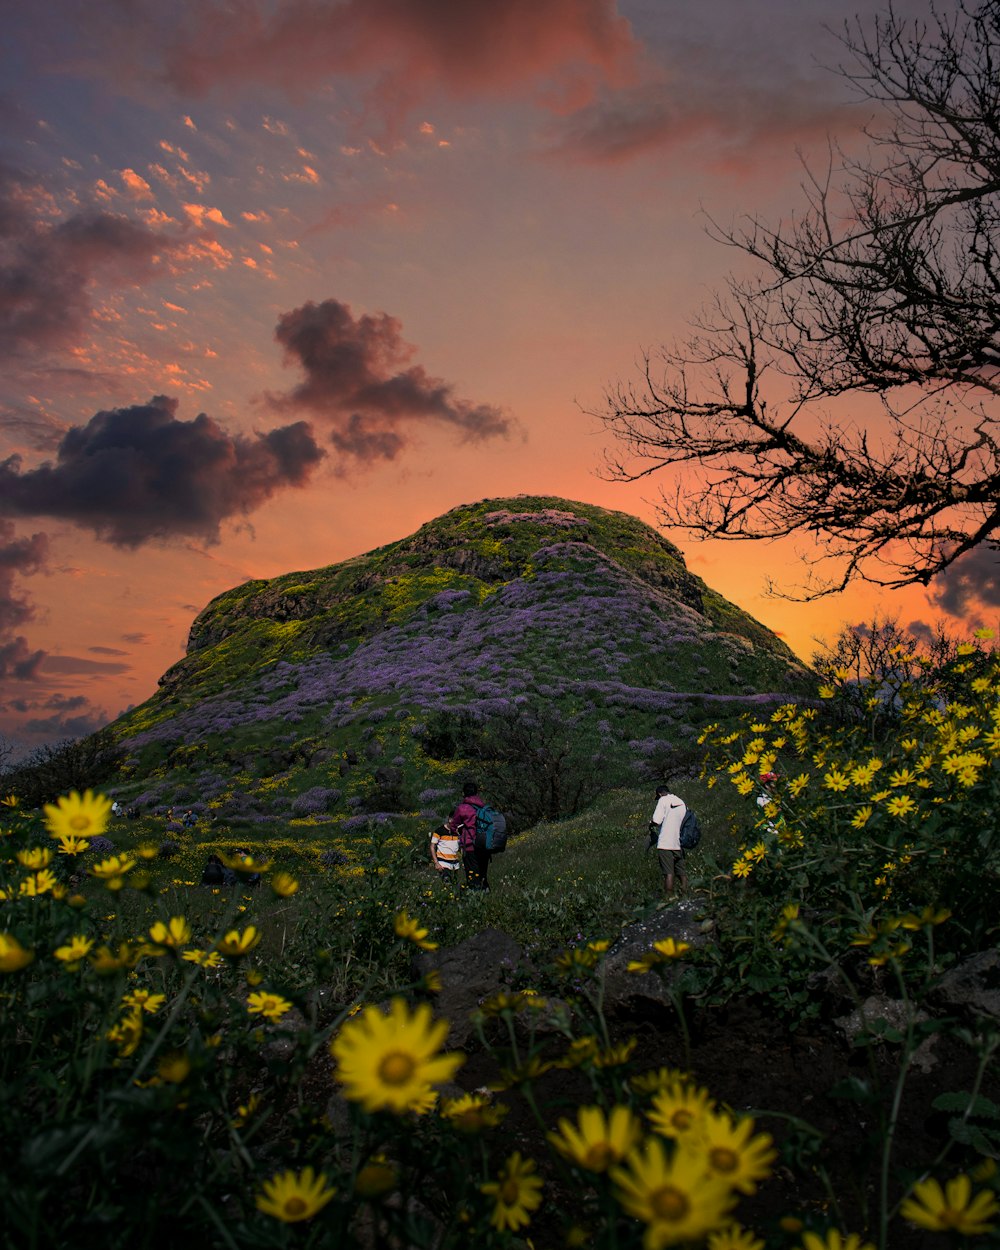 a group of people walking up a hill at sunset